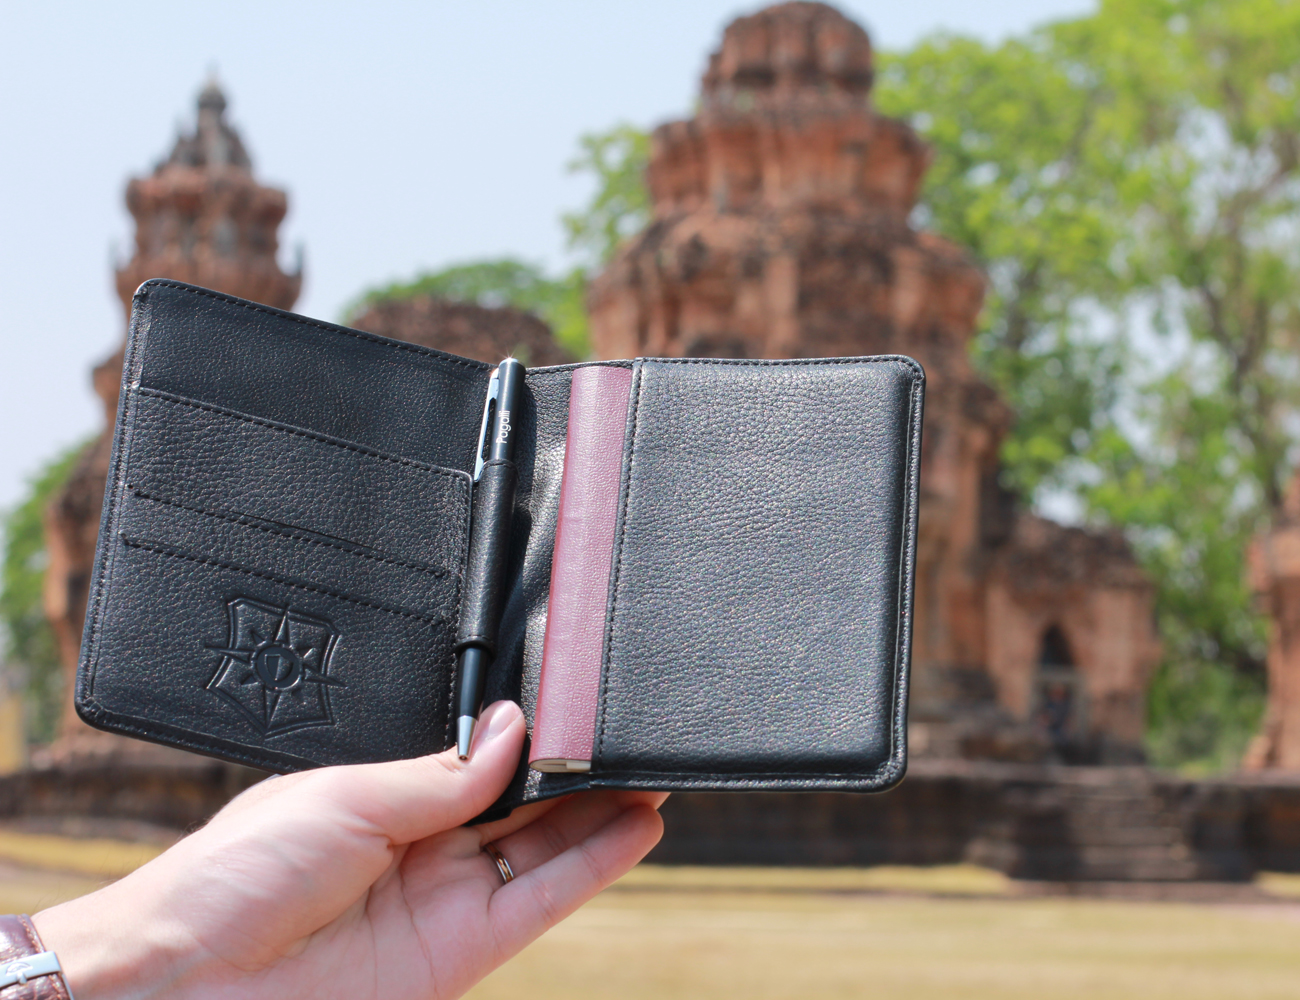 I.D. Theft Protection Perfection with ‘Pagalli’ Fine Leather Wallets